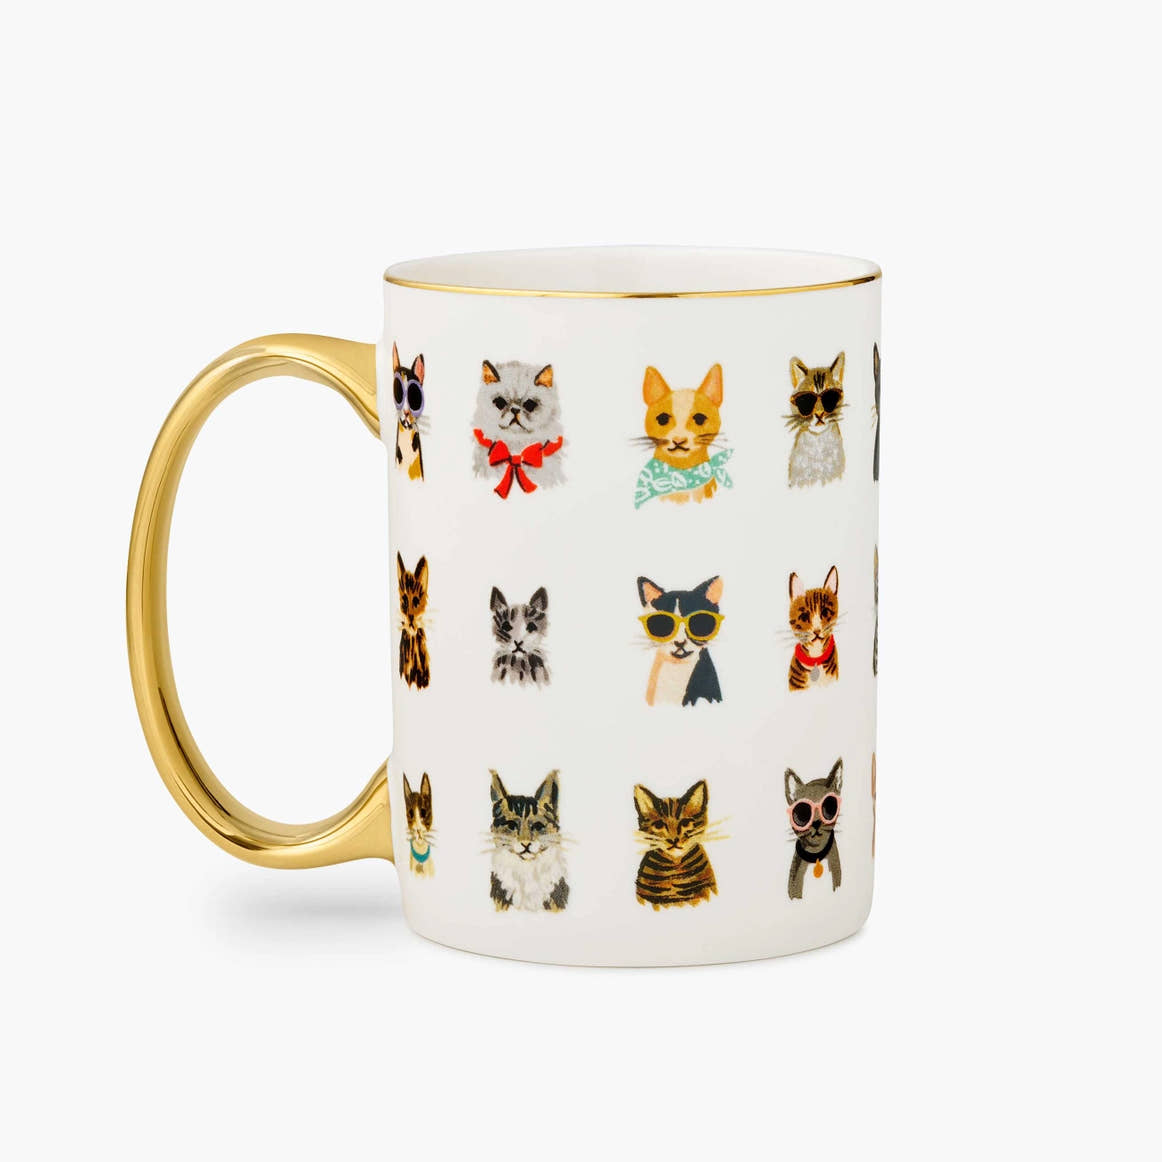 Various Cats Wearing Accessories Porcelain Mug with Gold Handle